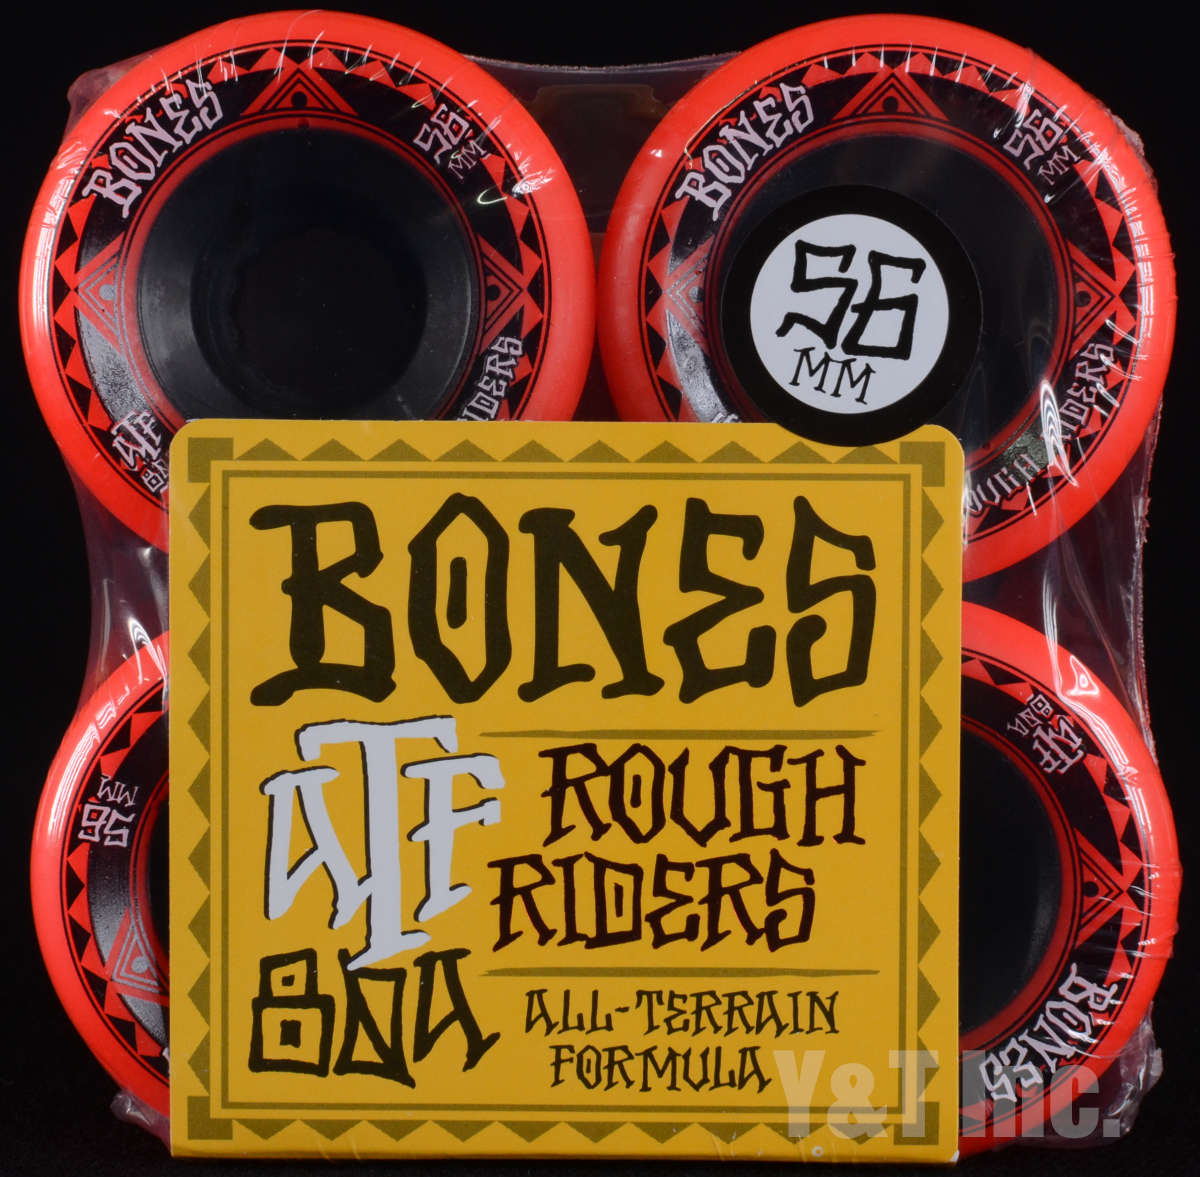 BONES ATF ROUGH RIDERS RUNNERS 56mm 80a Red 1